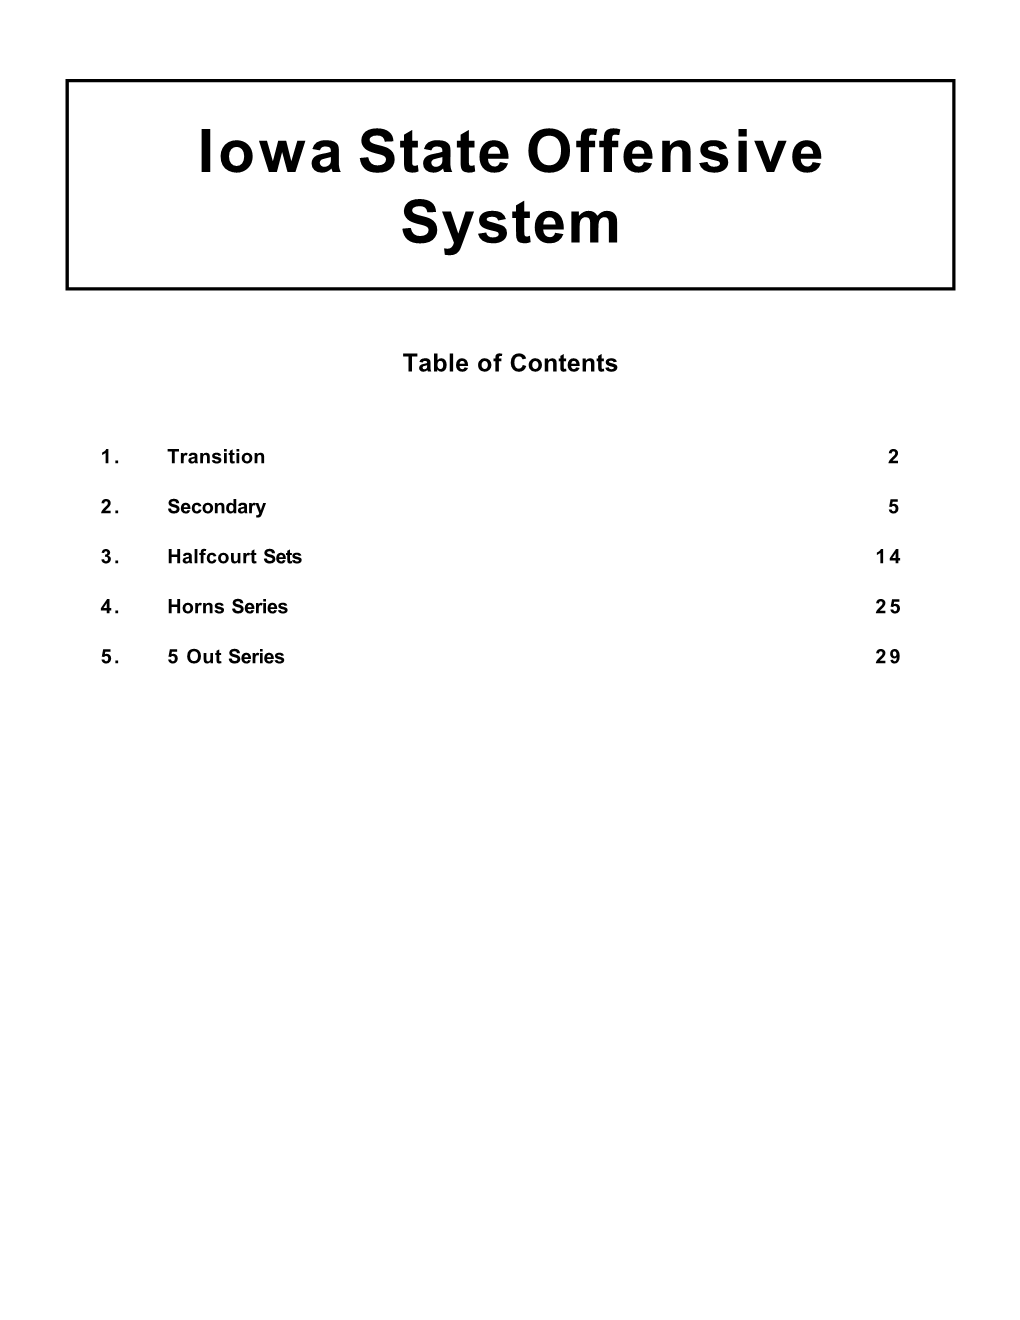 Iowa State Offensive System